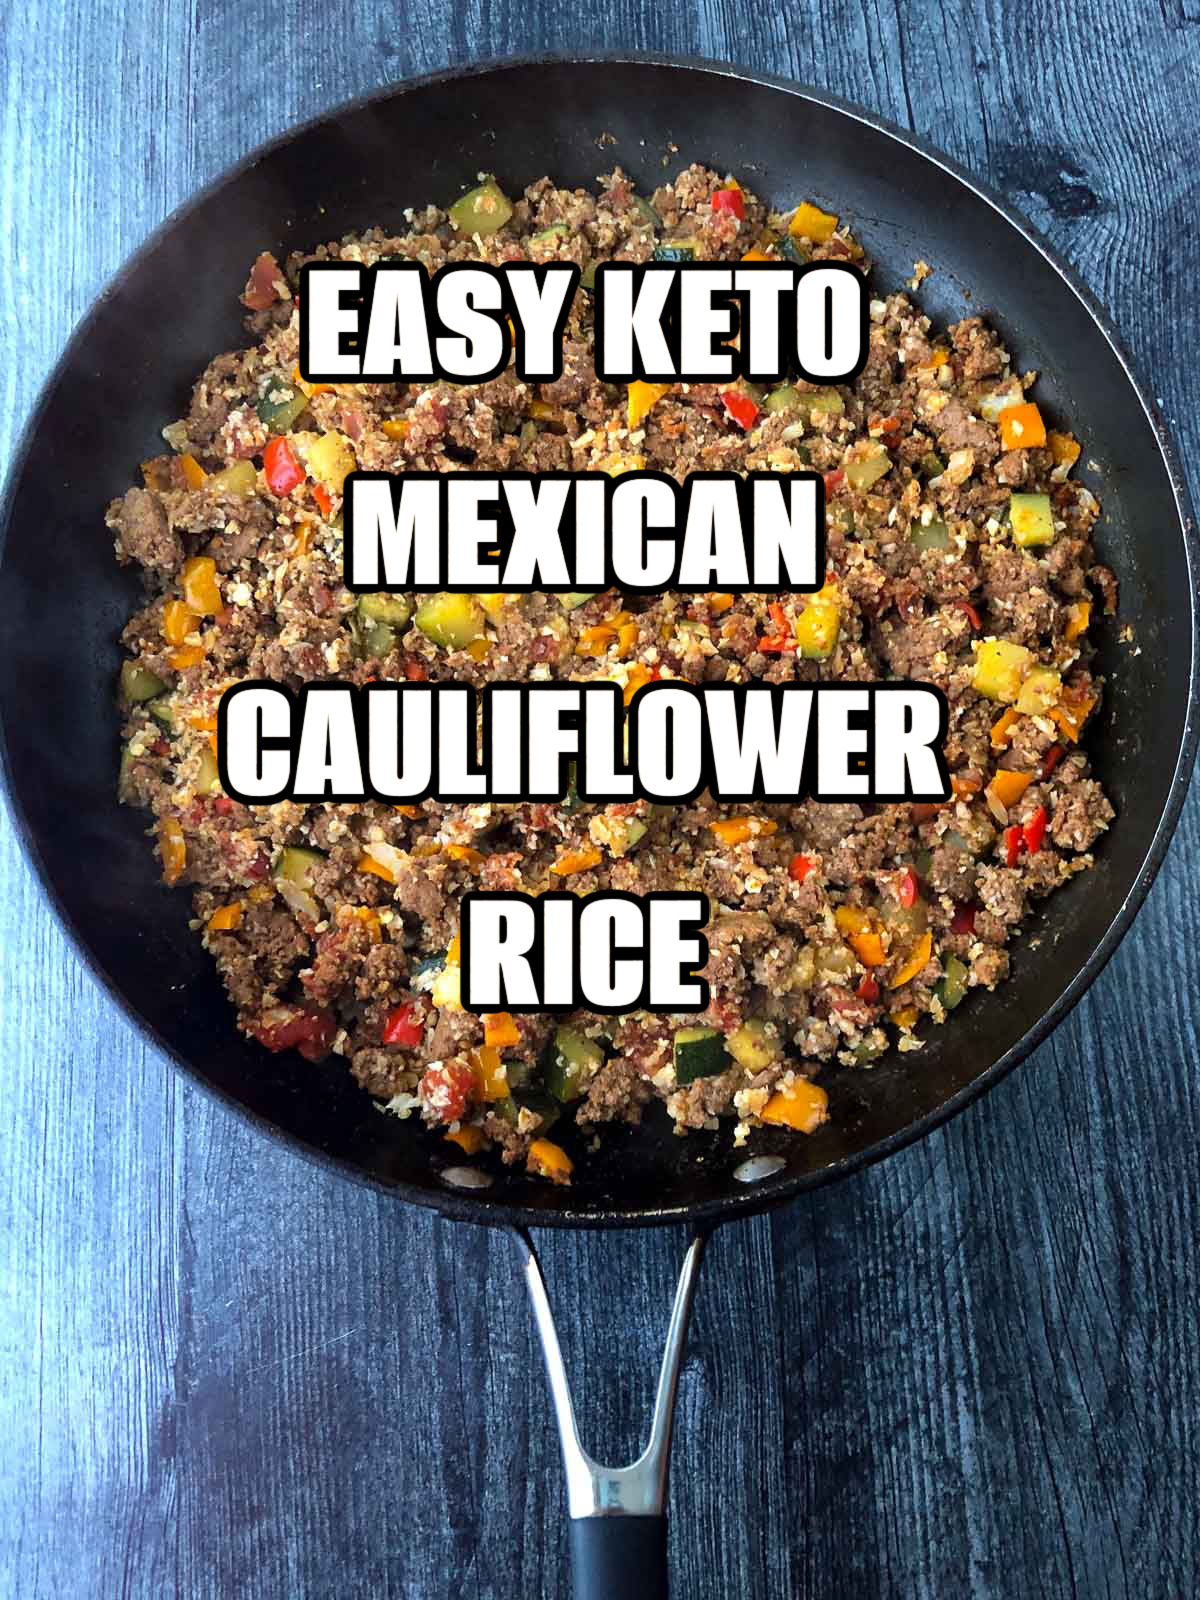 pan with finished low carb Mexican rice with text